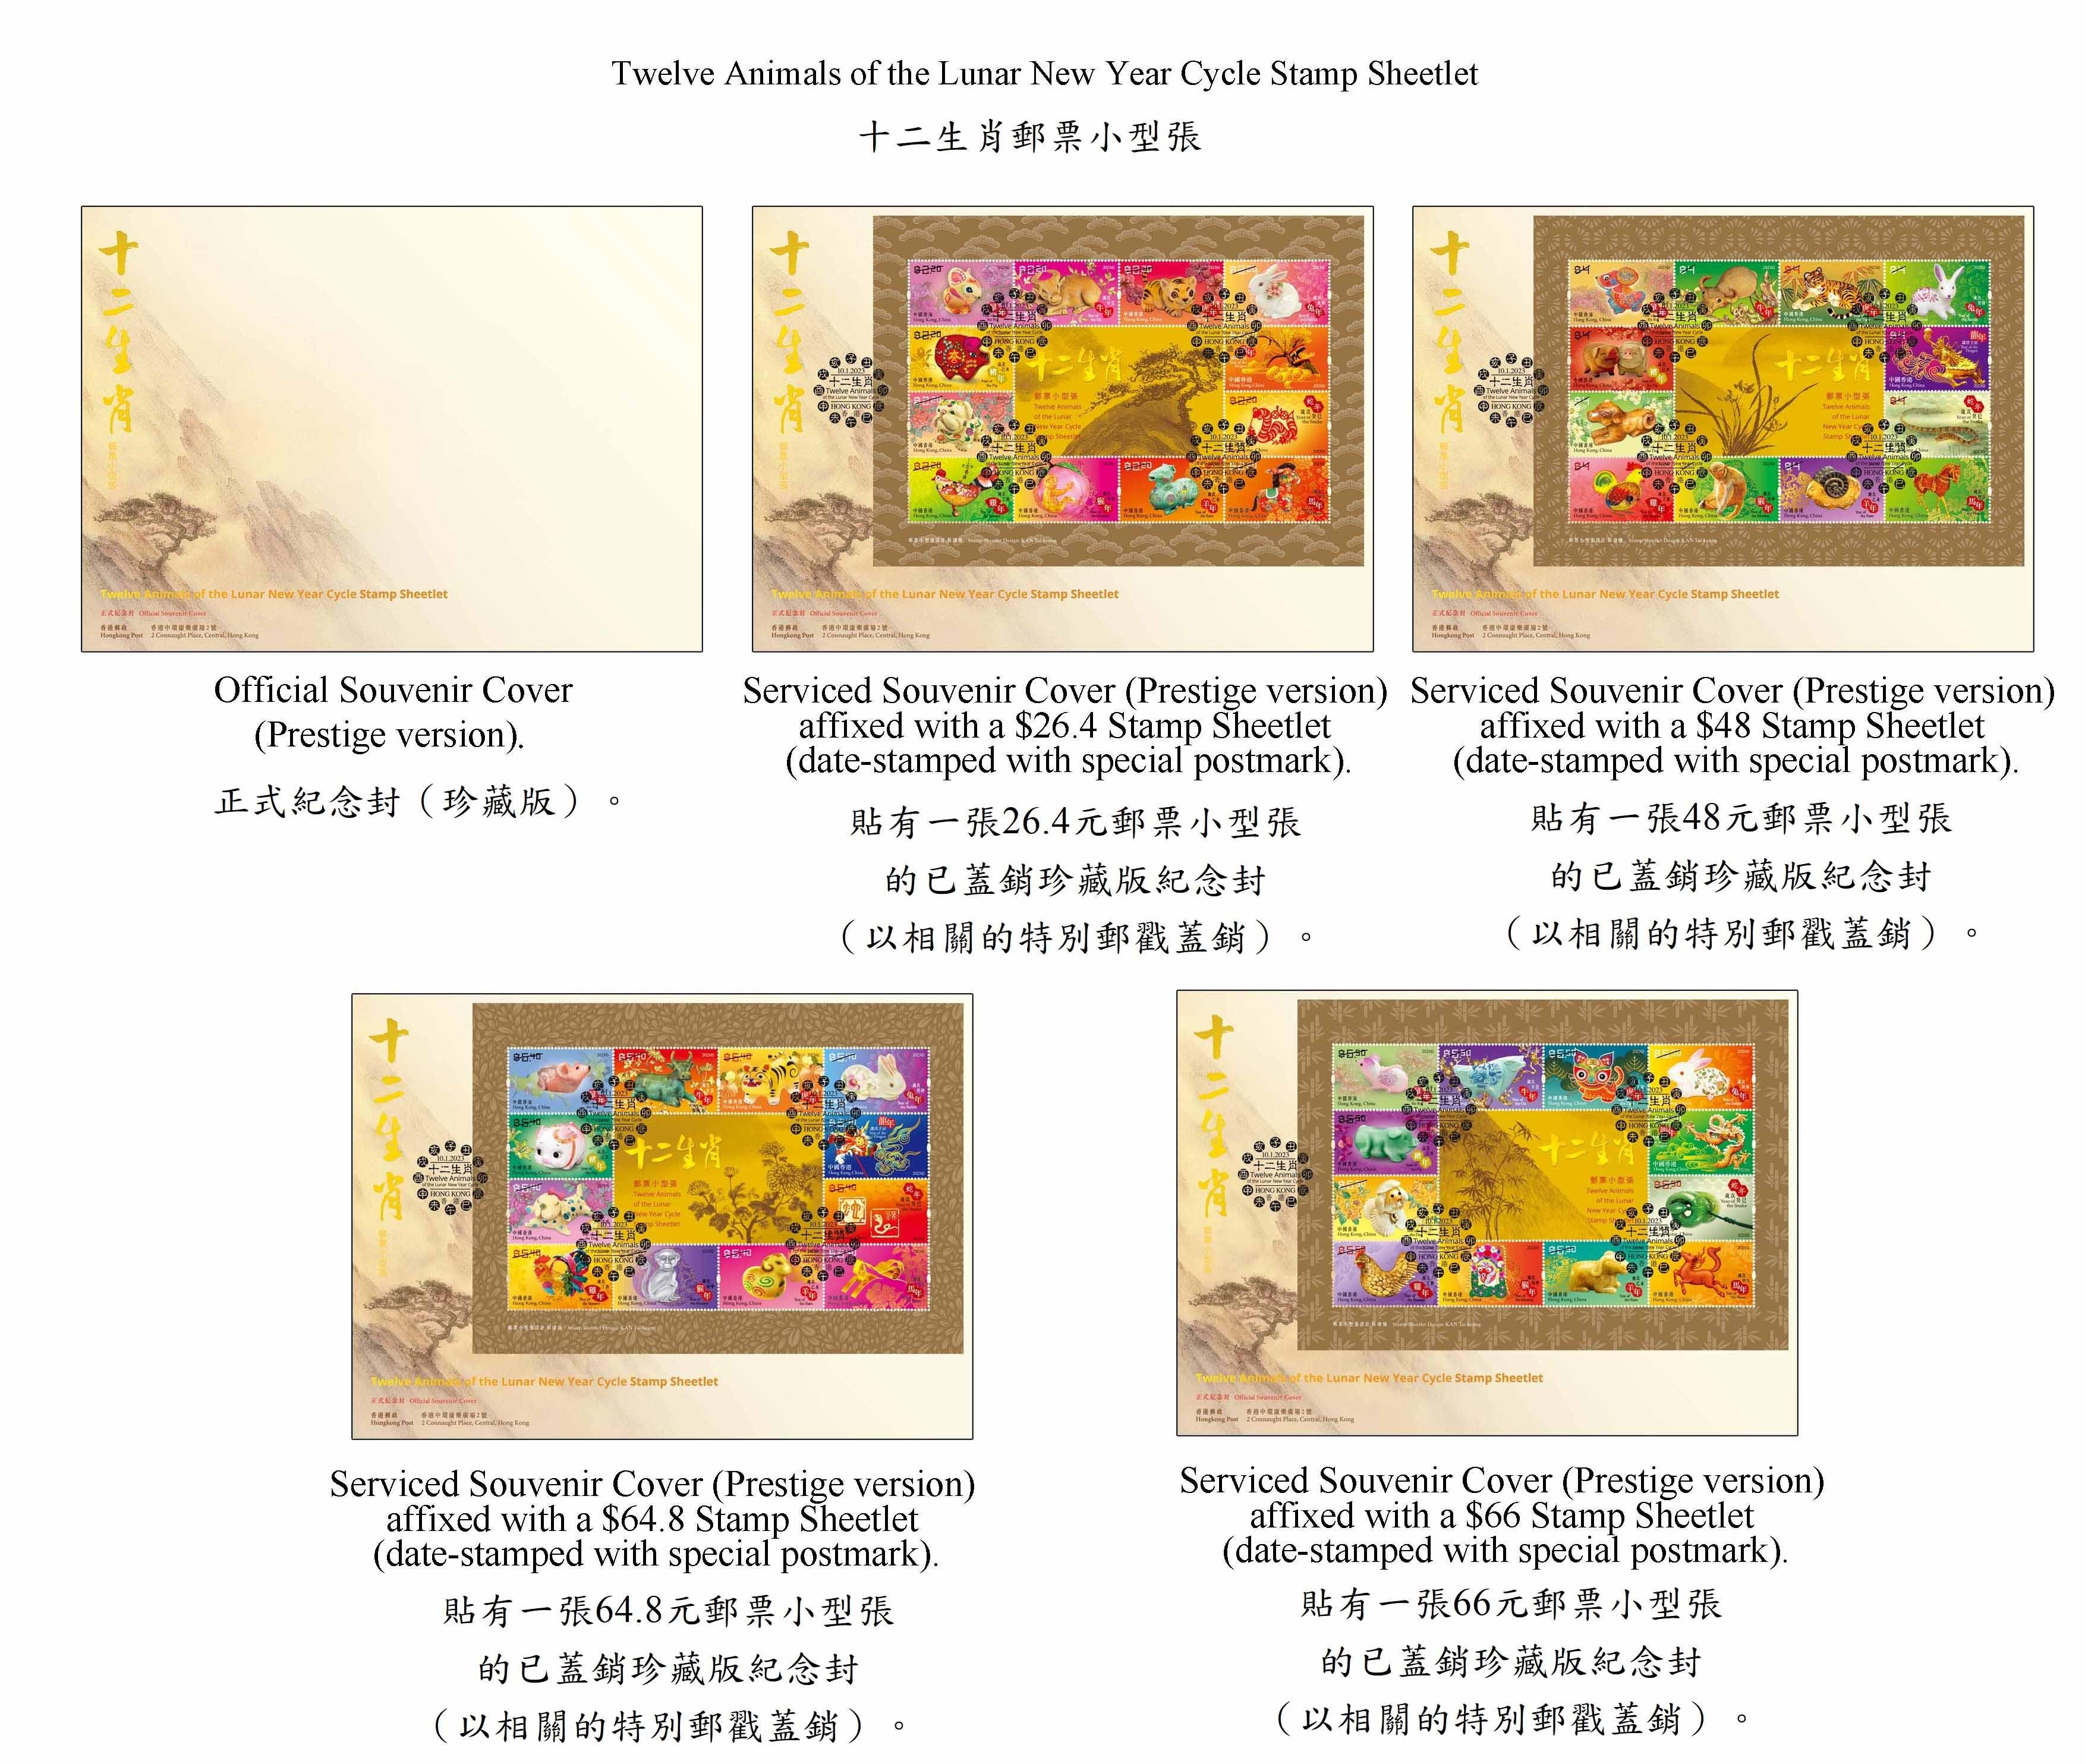 Hongkong Post will launch a special stamp issue and associated philatelic products with the theme "Year of the Rabbit" on January 10, 2023 (Tuesday). The "Twelve Animals of the Lunar New Year Cycle Stamp Sheetlet" will also be launched on the same day. Photo shows the prestige souvenir covers.
